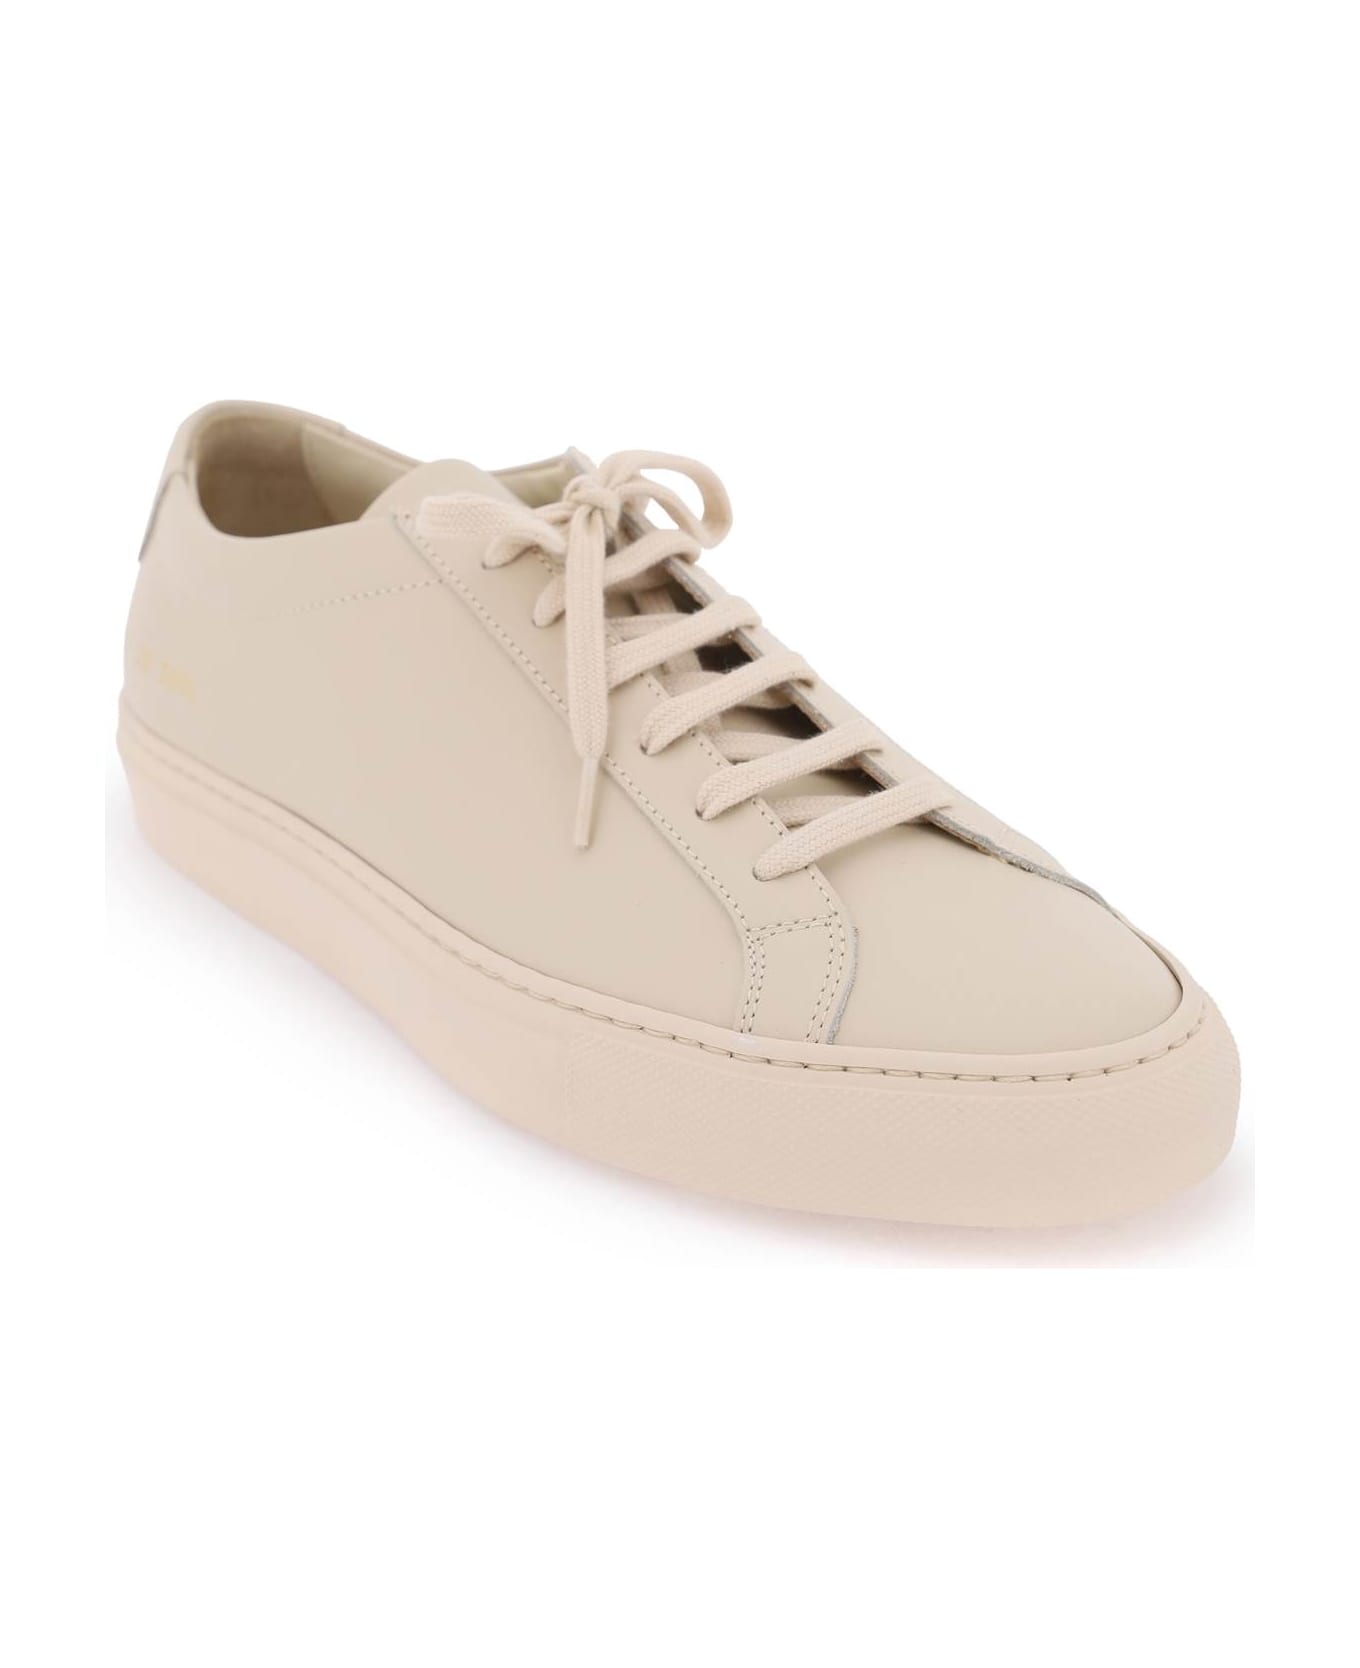 Common Projects Original Achilles Leather Sneakers - Nude スニーカー